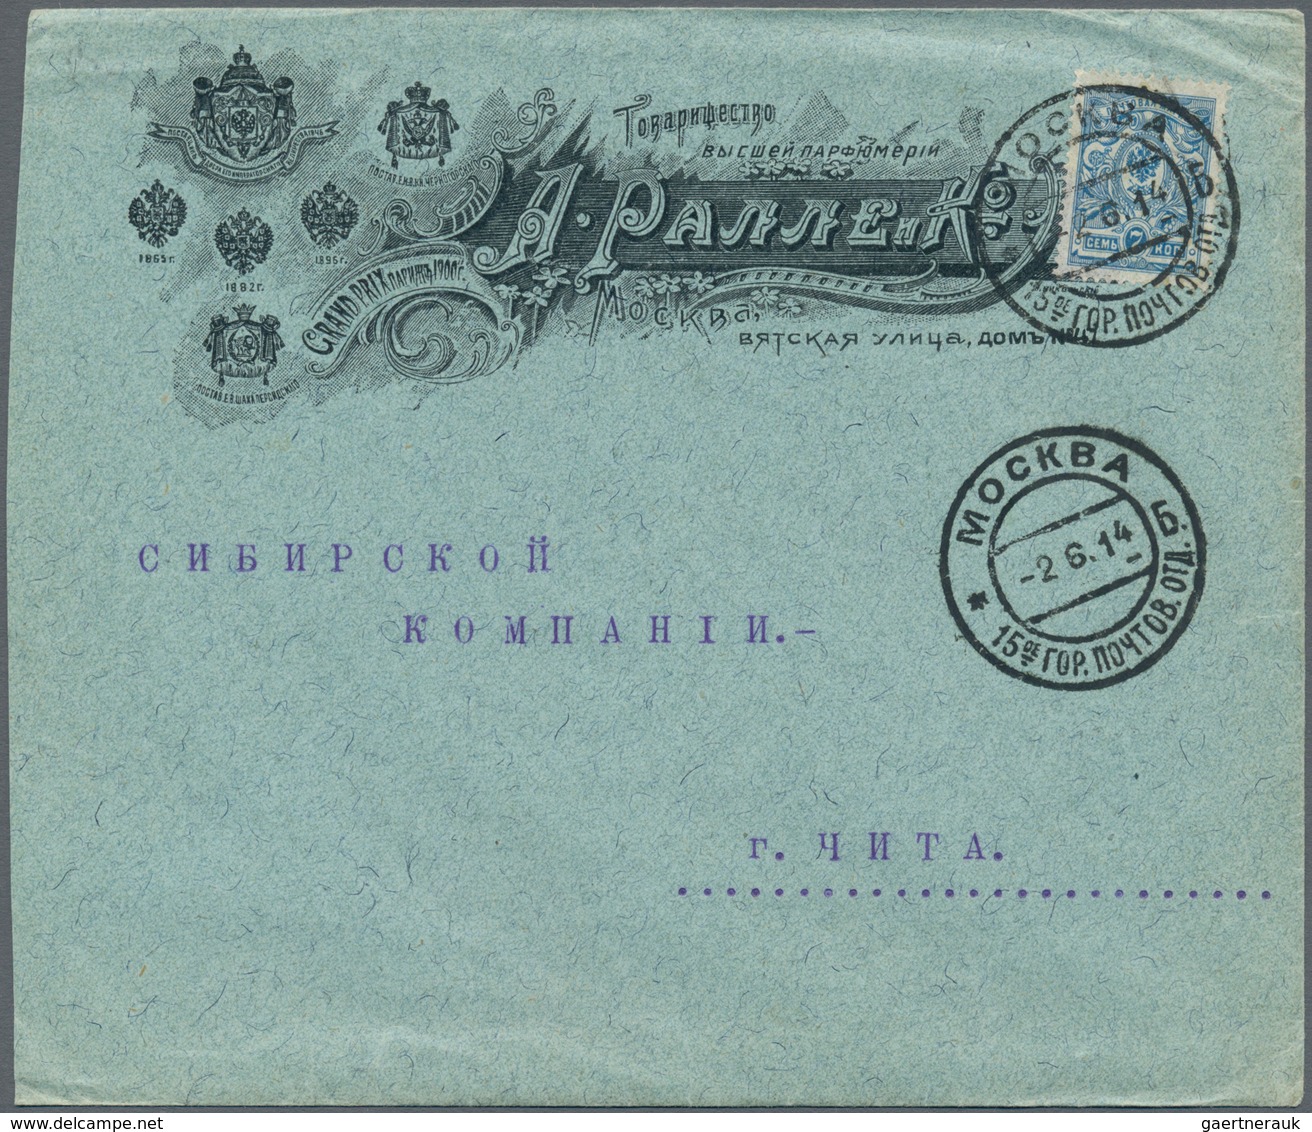 Russland: 1860/1918 phantastic collection of ca. 256 covers cards lettercards stationeries of a very